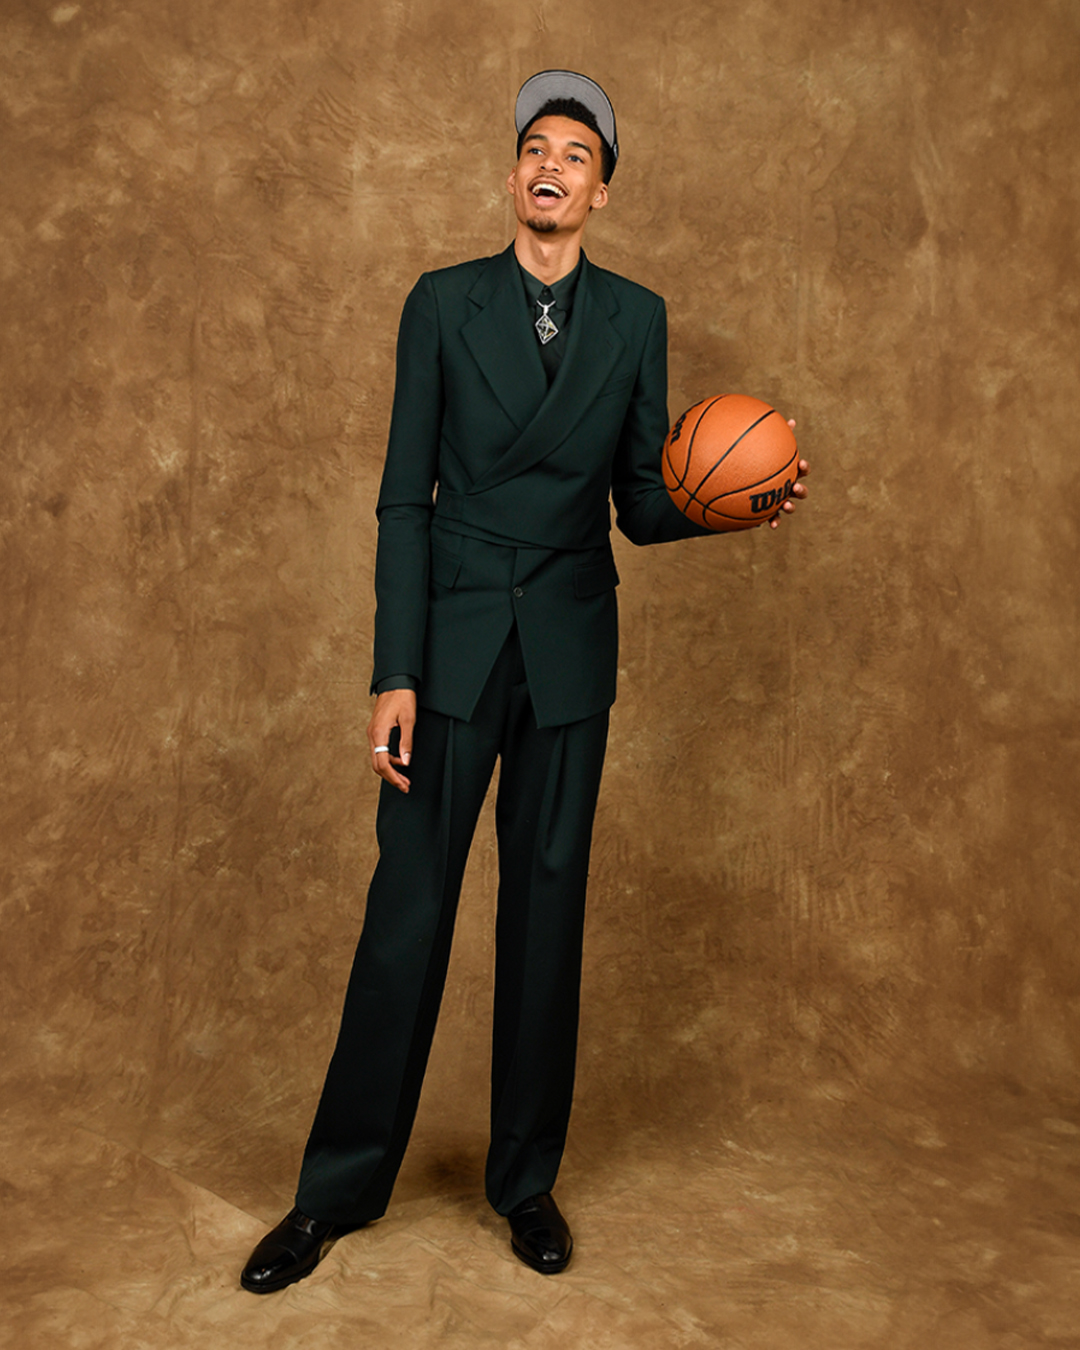 Louis Vuitton on X: The Maison congratulates Victor Wembanyama. The basketball  player became the first French number 1 pick in the NBA Draft. Dressed in a  forest green wrapped jacket and tailored